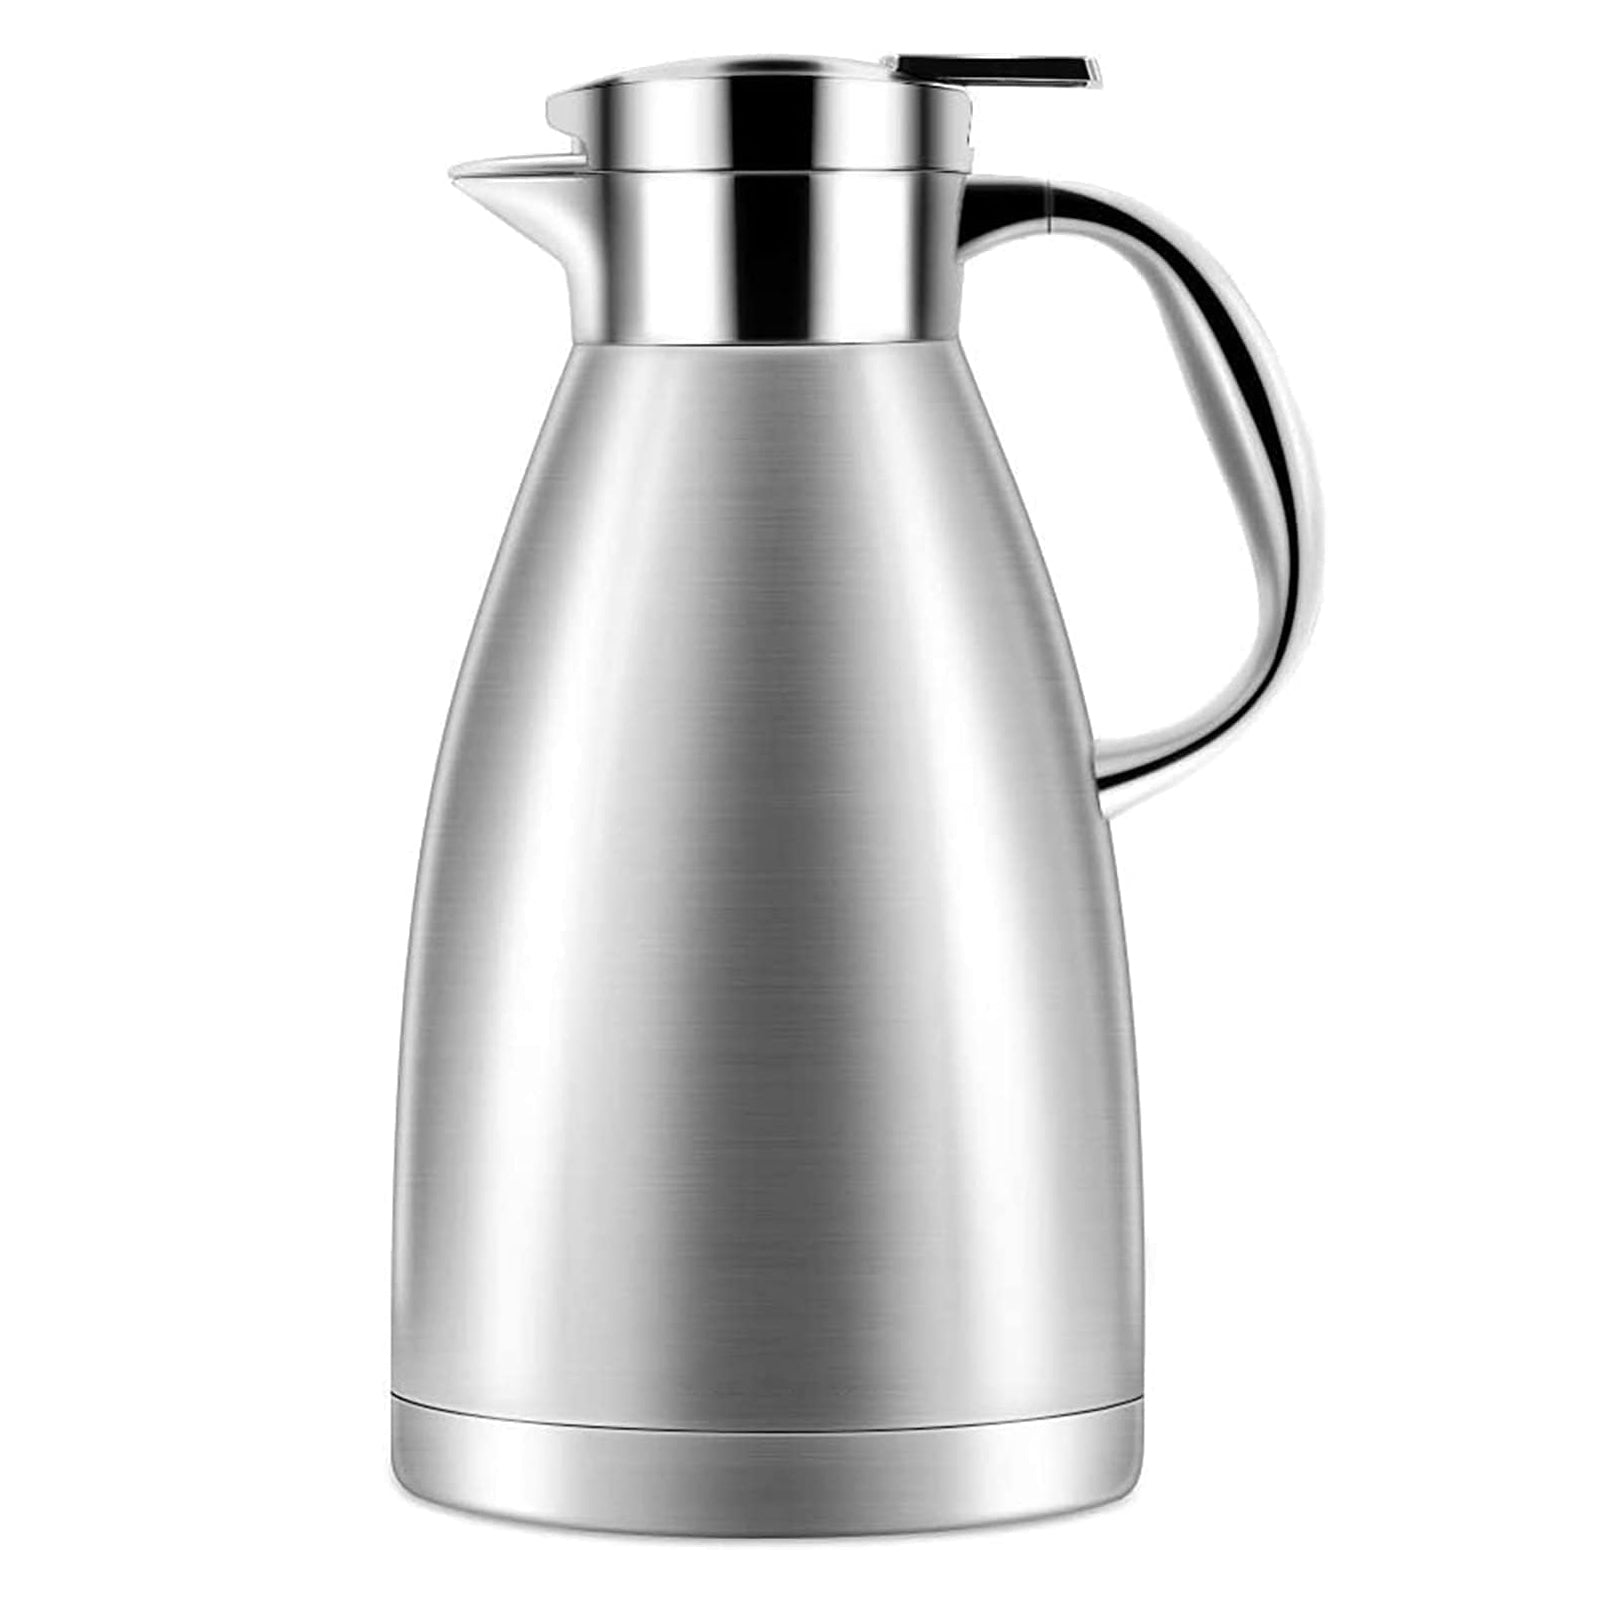 68oz Coffee Carafe 18/10 Stainless Steel/Double Walled Vacuum Insulate